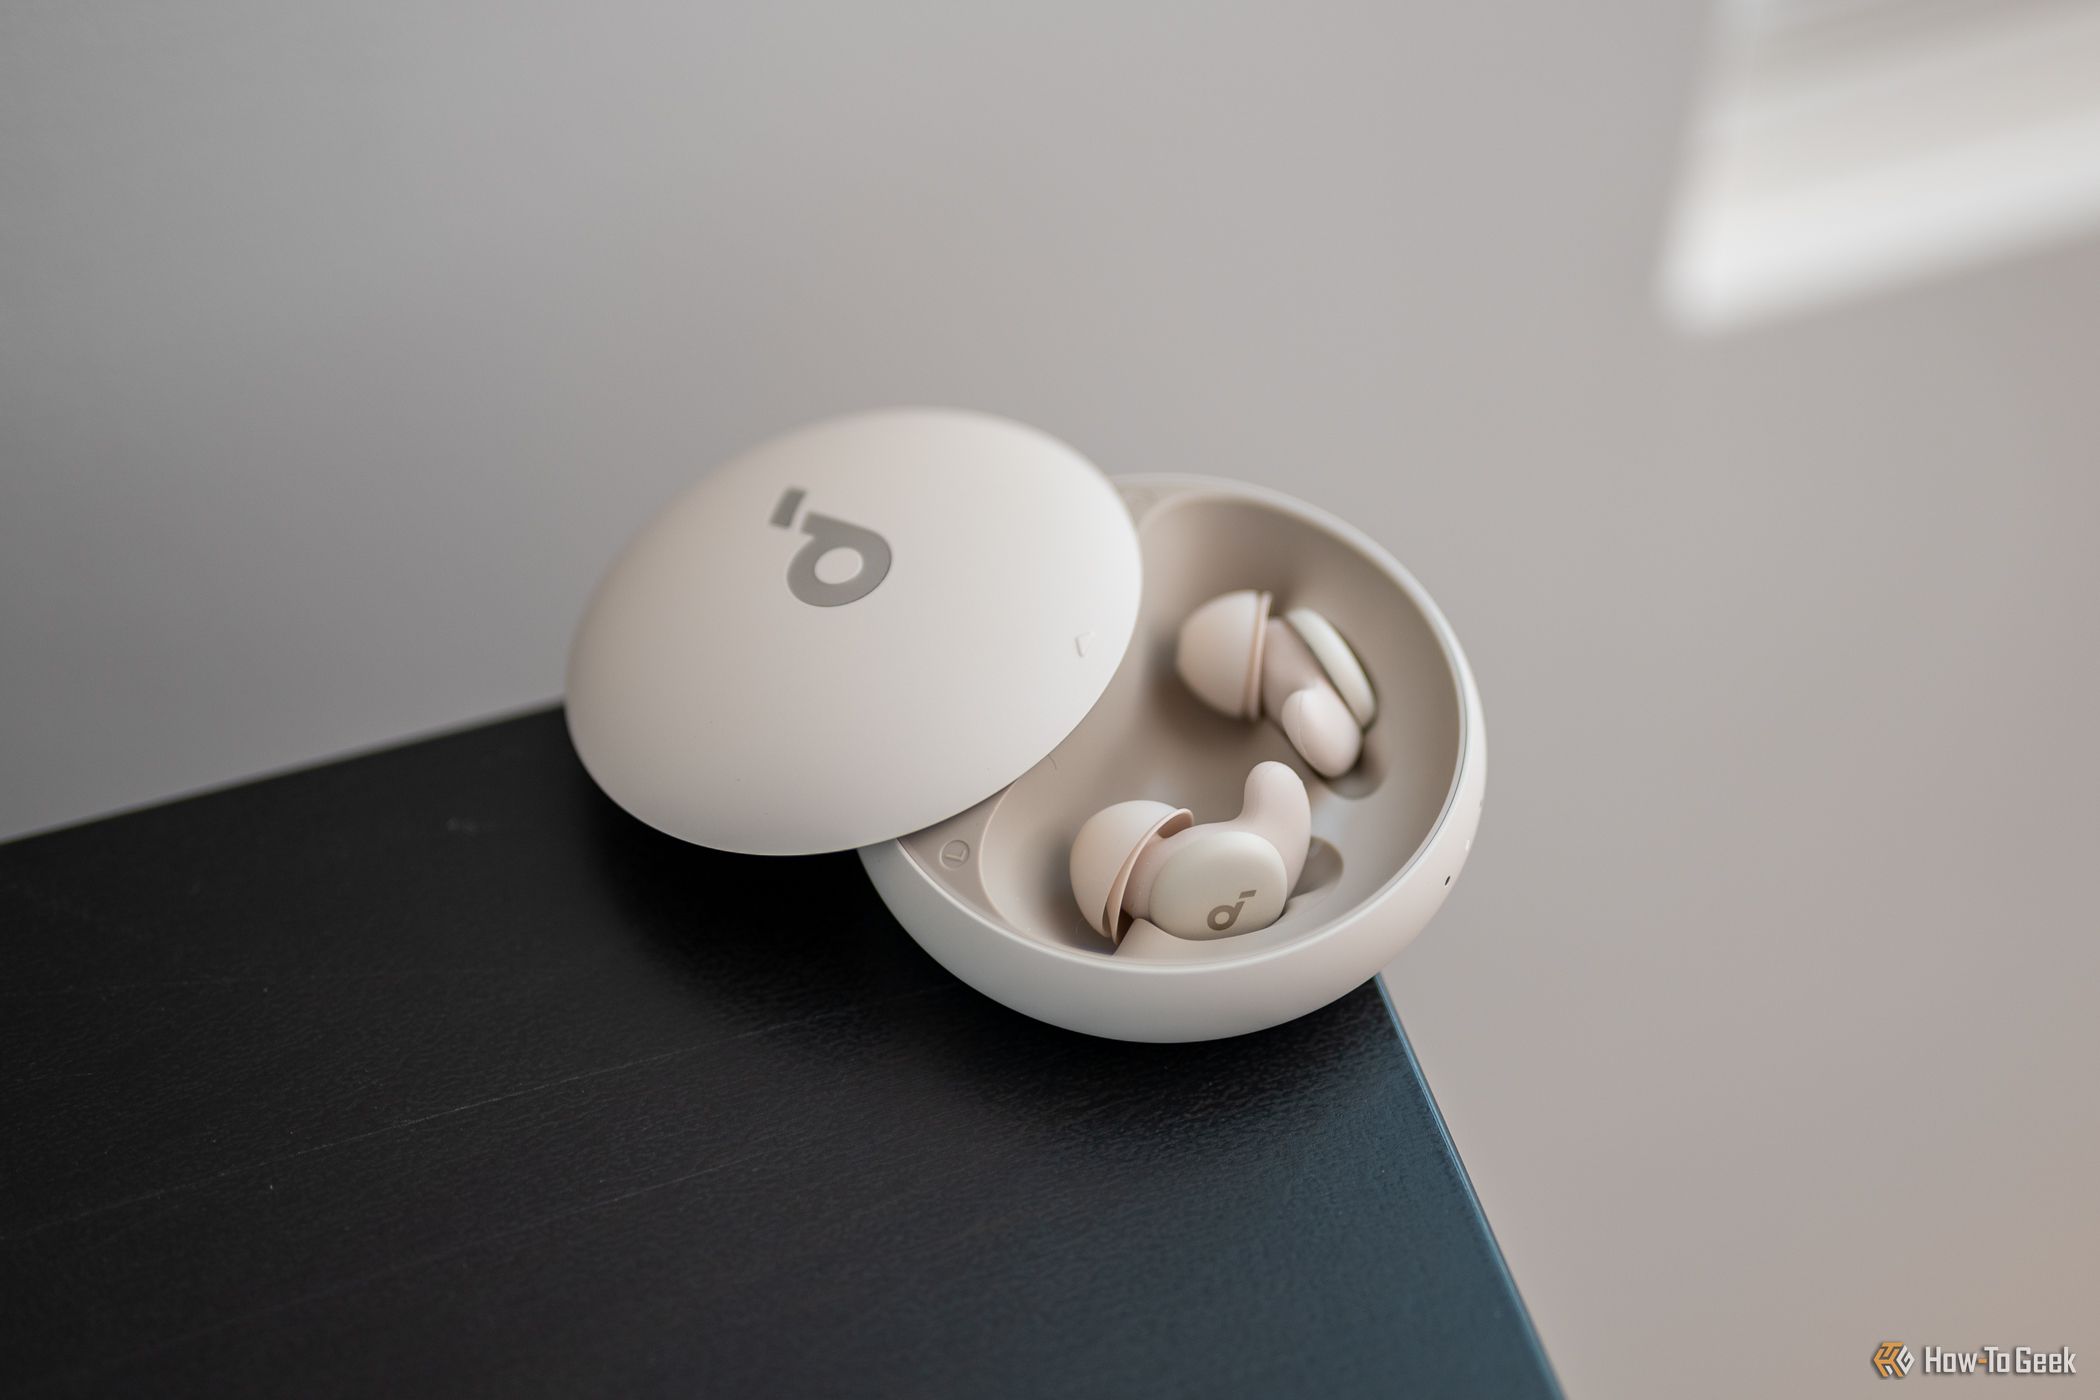 Soundcore Sleep A20 Bluetooth Earbuds in its charging case sitting on a table